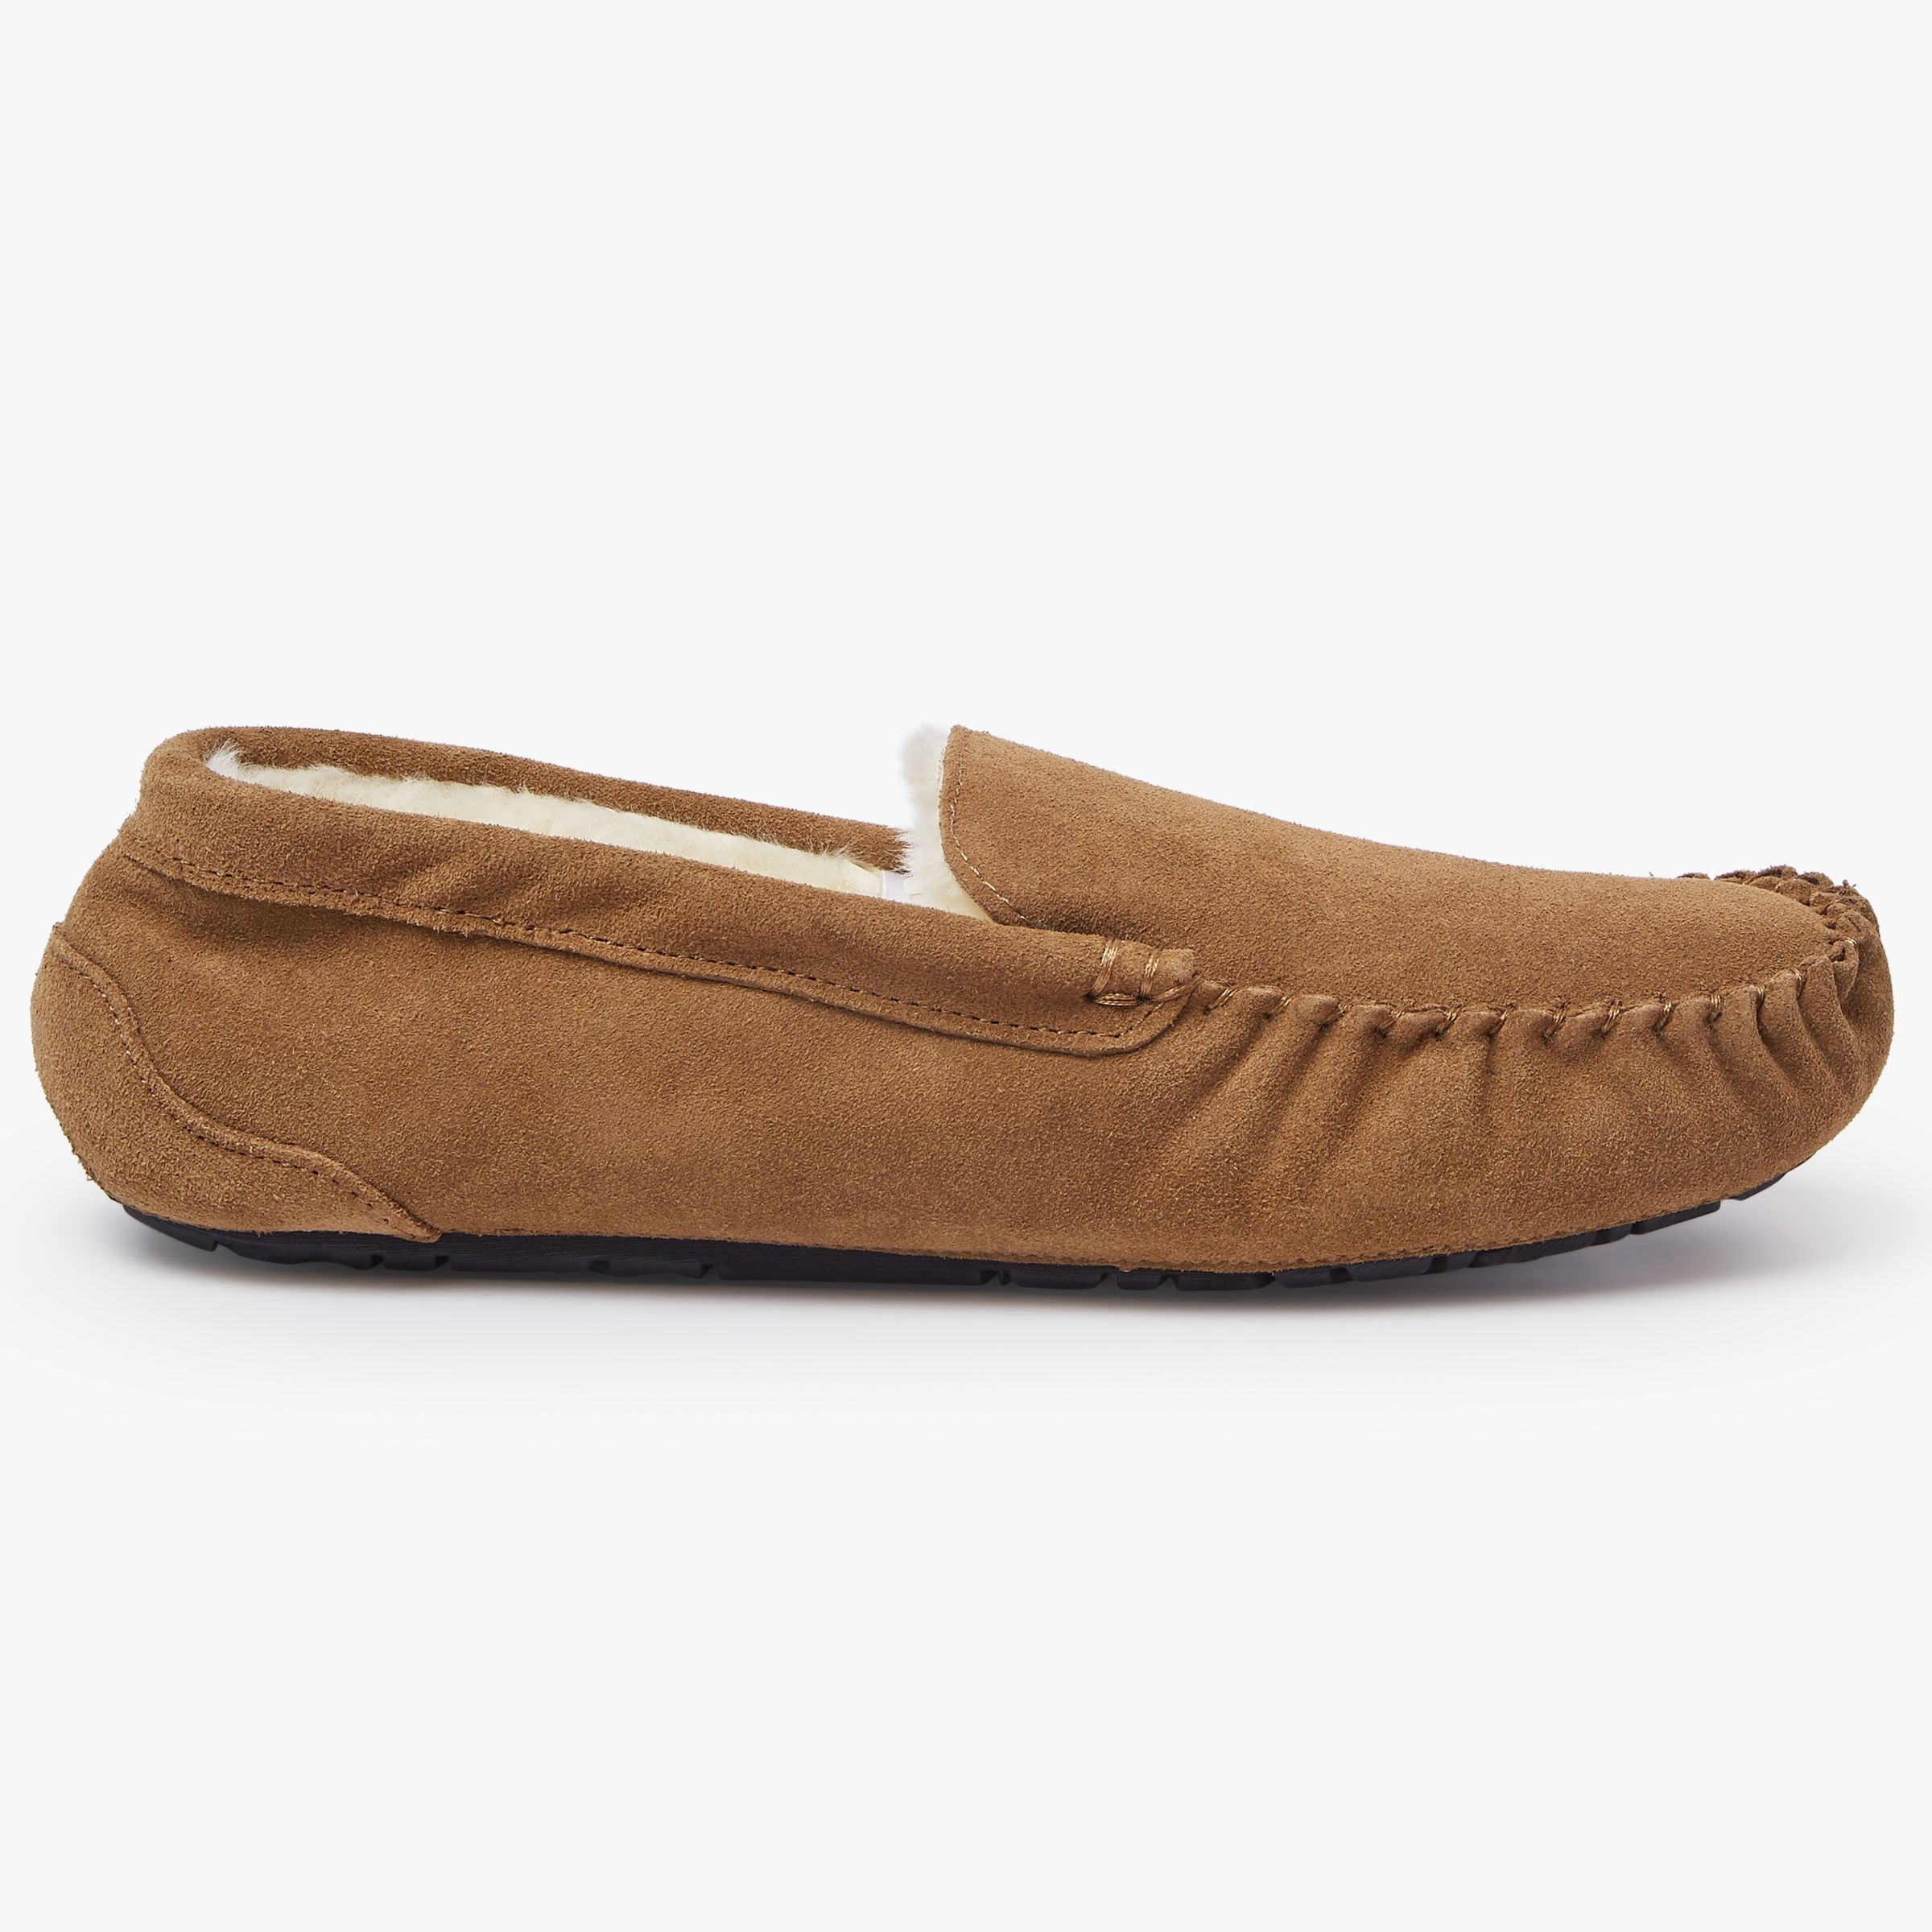 John Lewis & Partners Moccasin Faux Fur Lined Slippers, Chestnut, 10